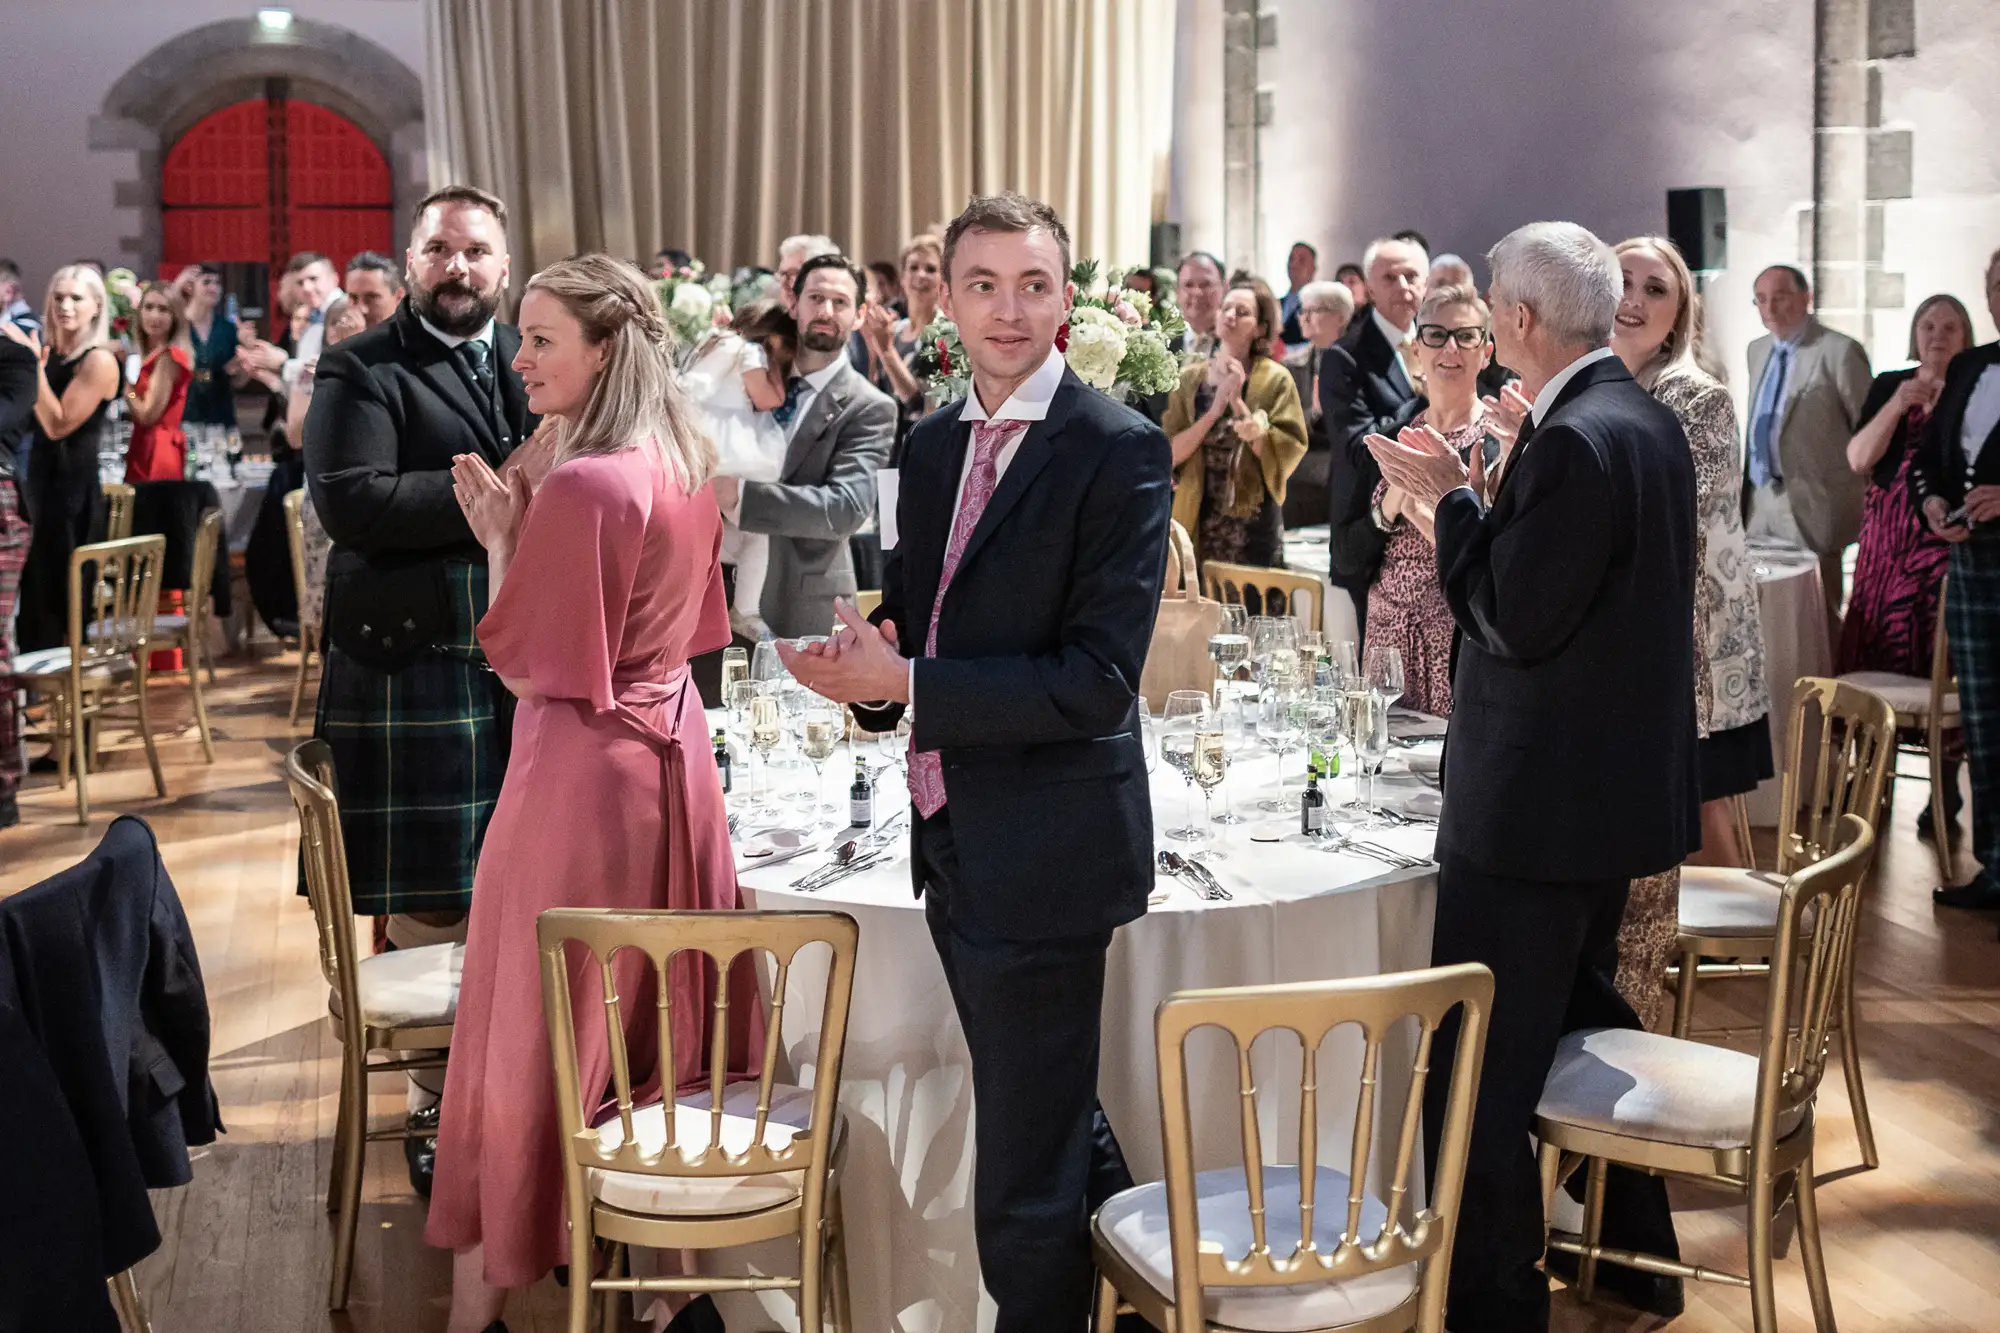 guests standing clapping during speeches